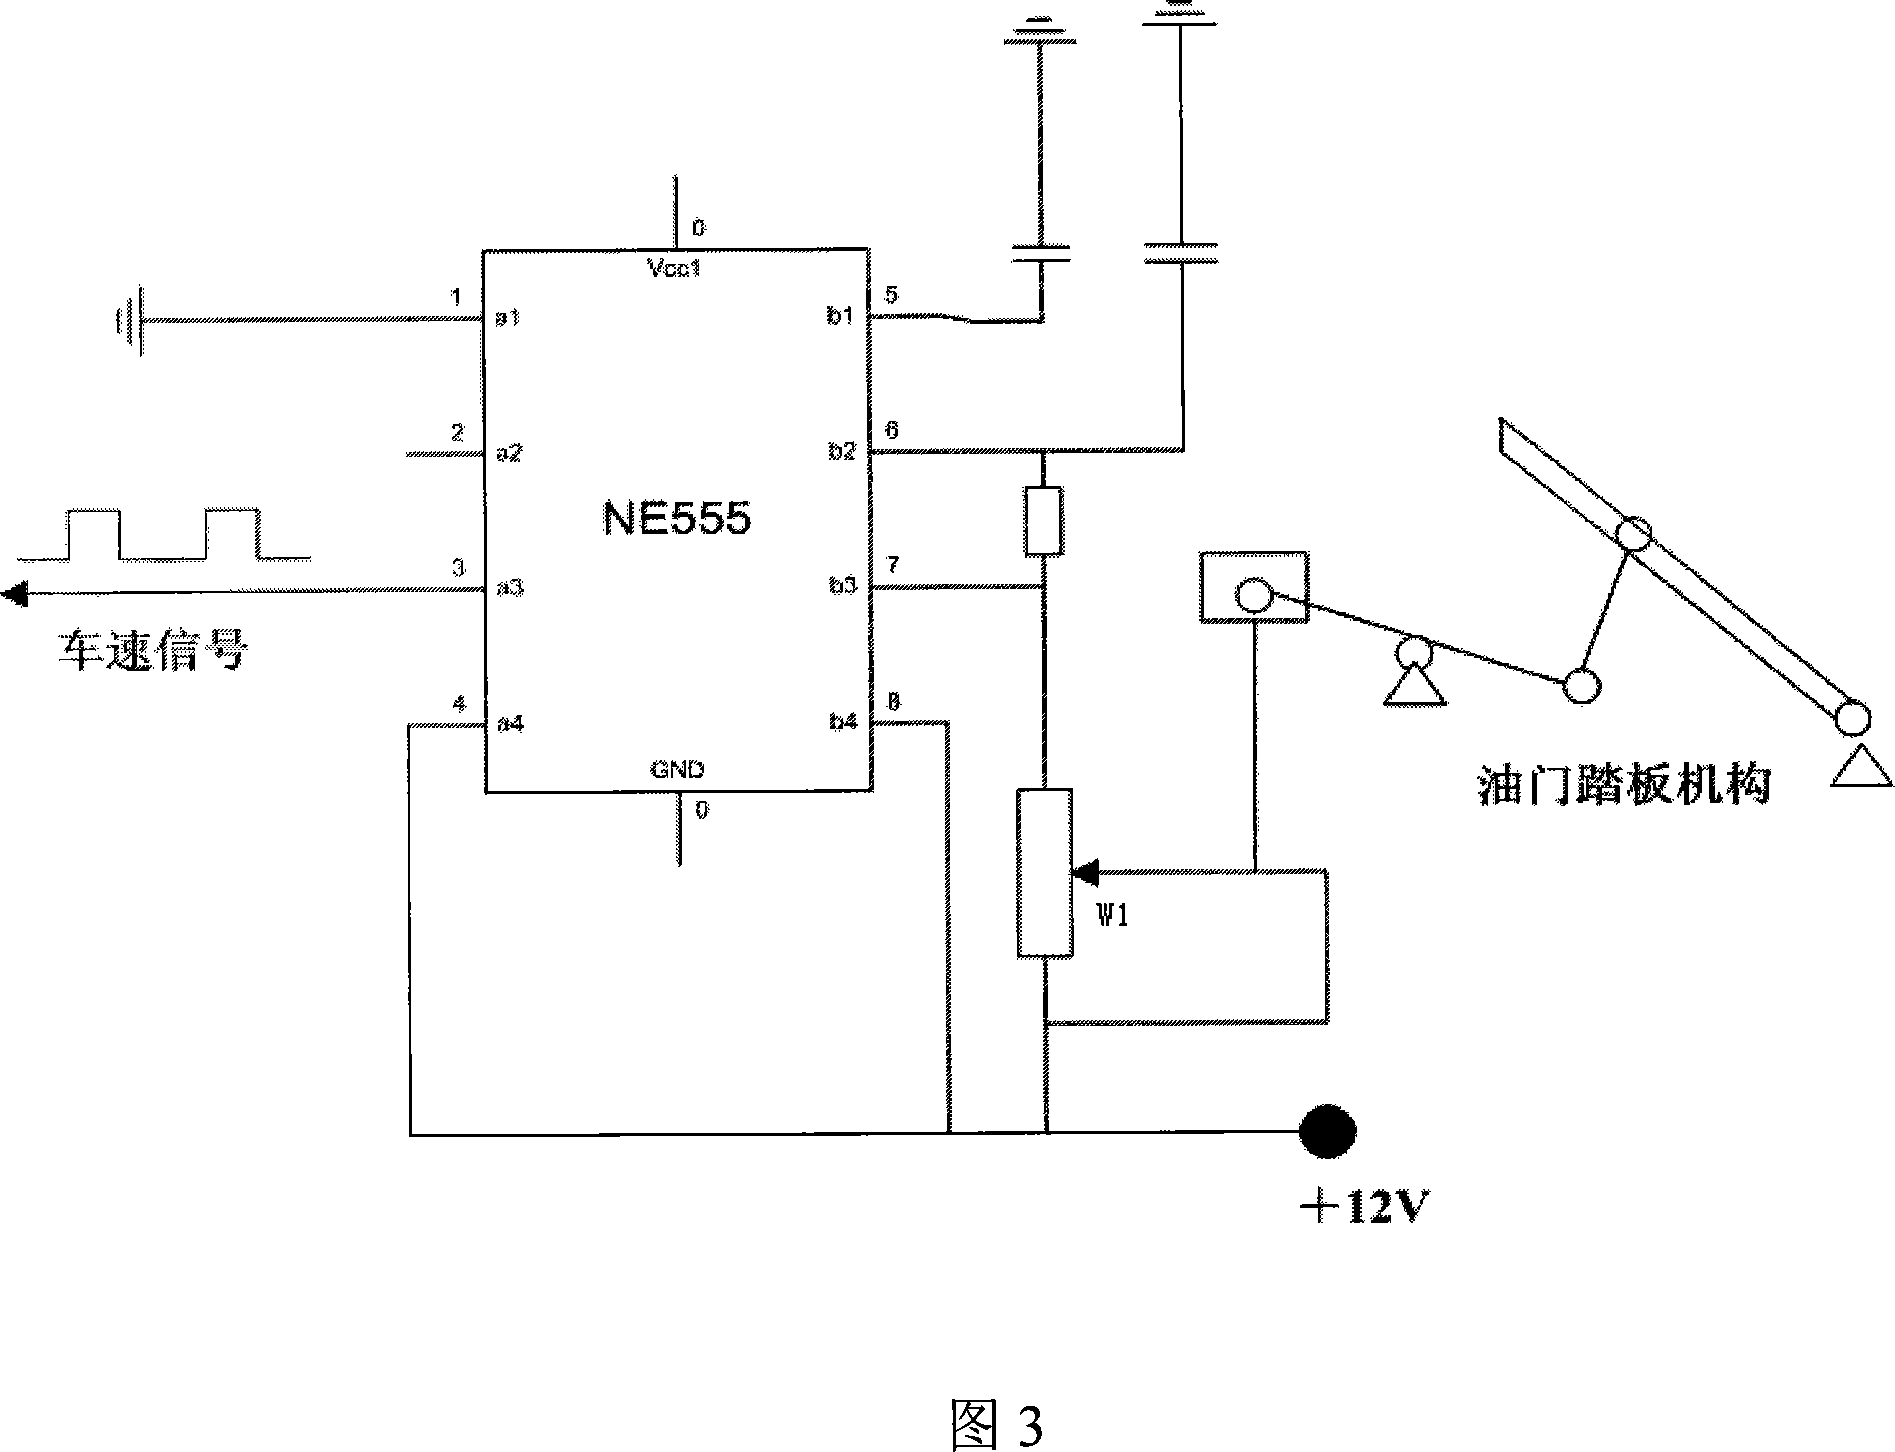 Emulation test-bed of vehicle electric power-assisted steering device